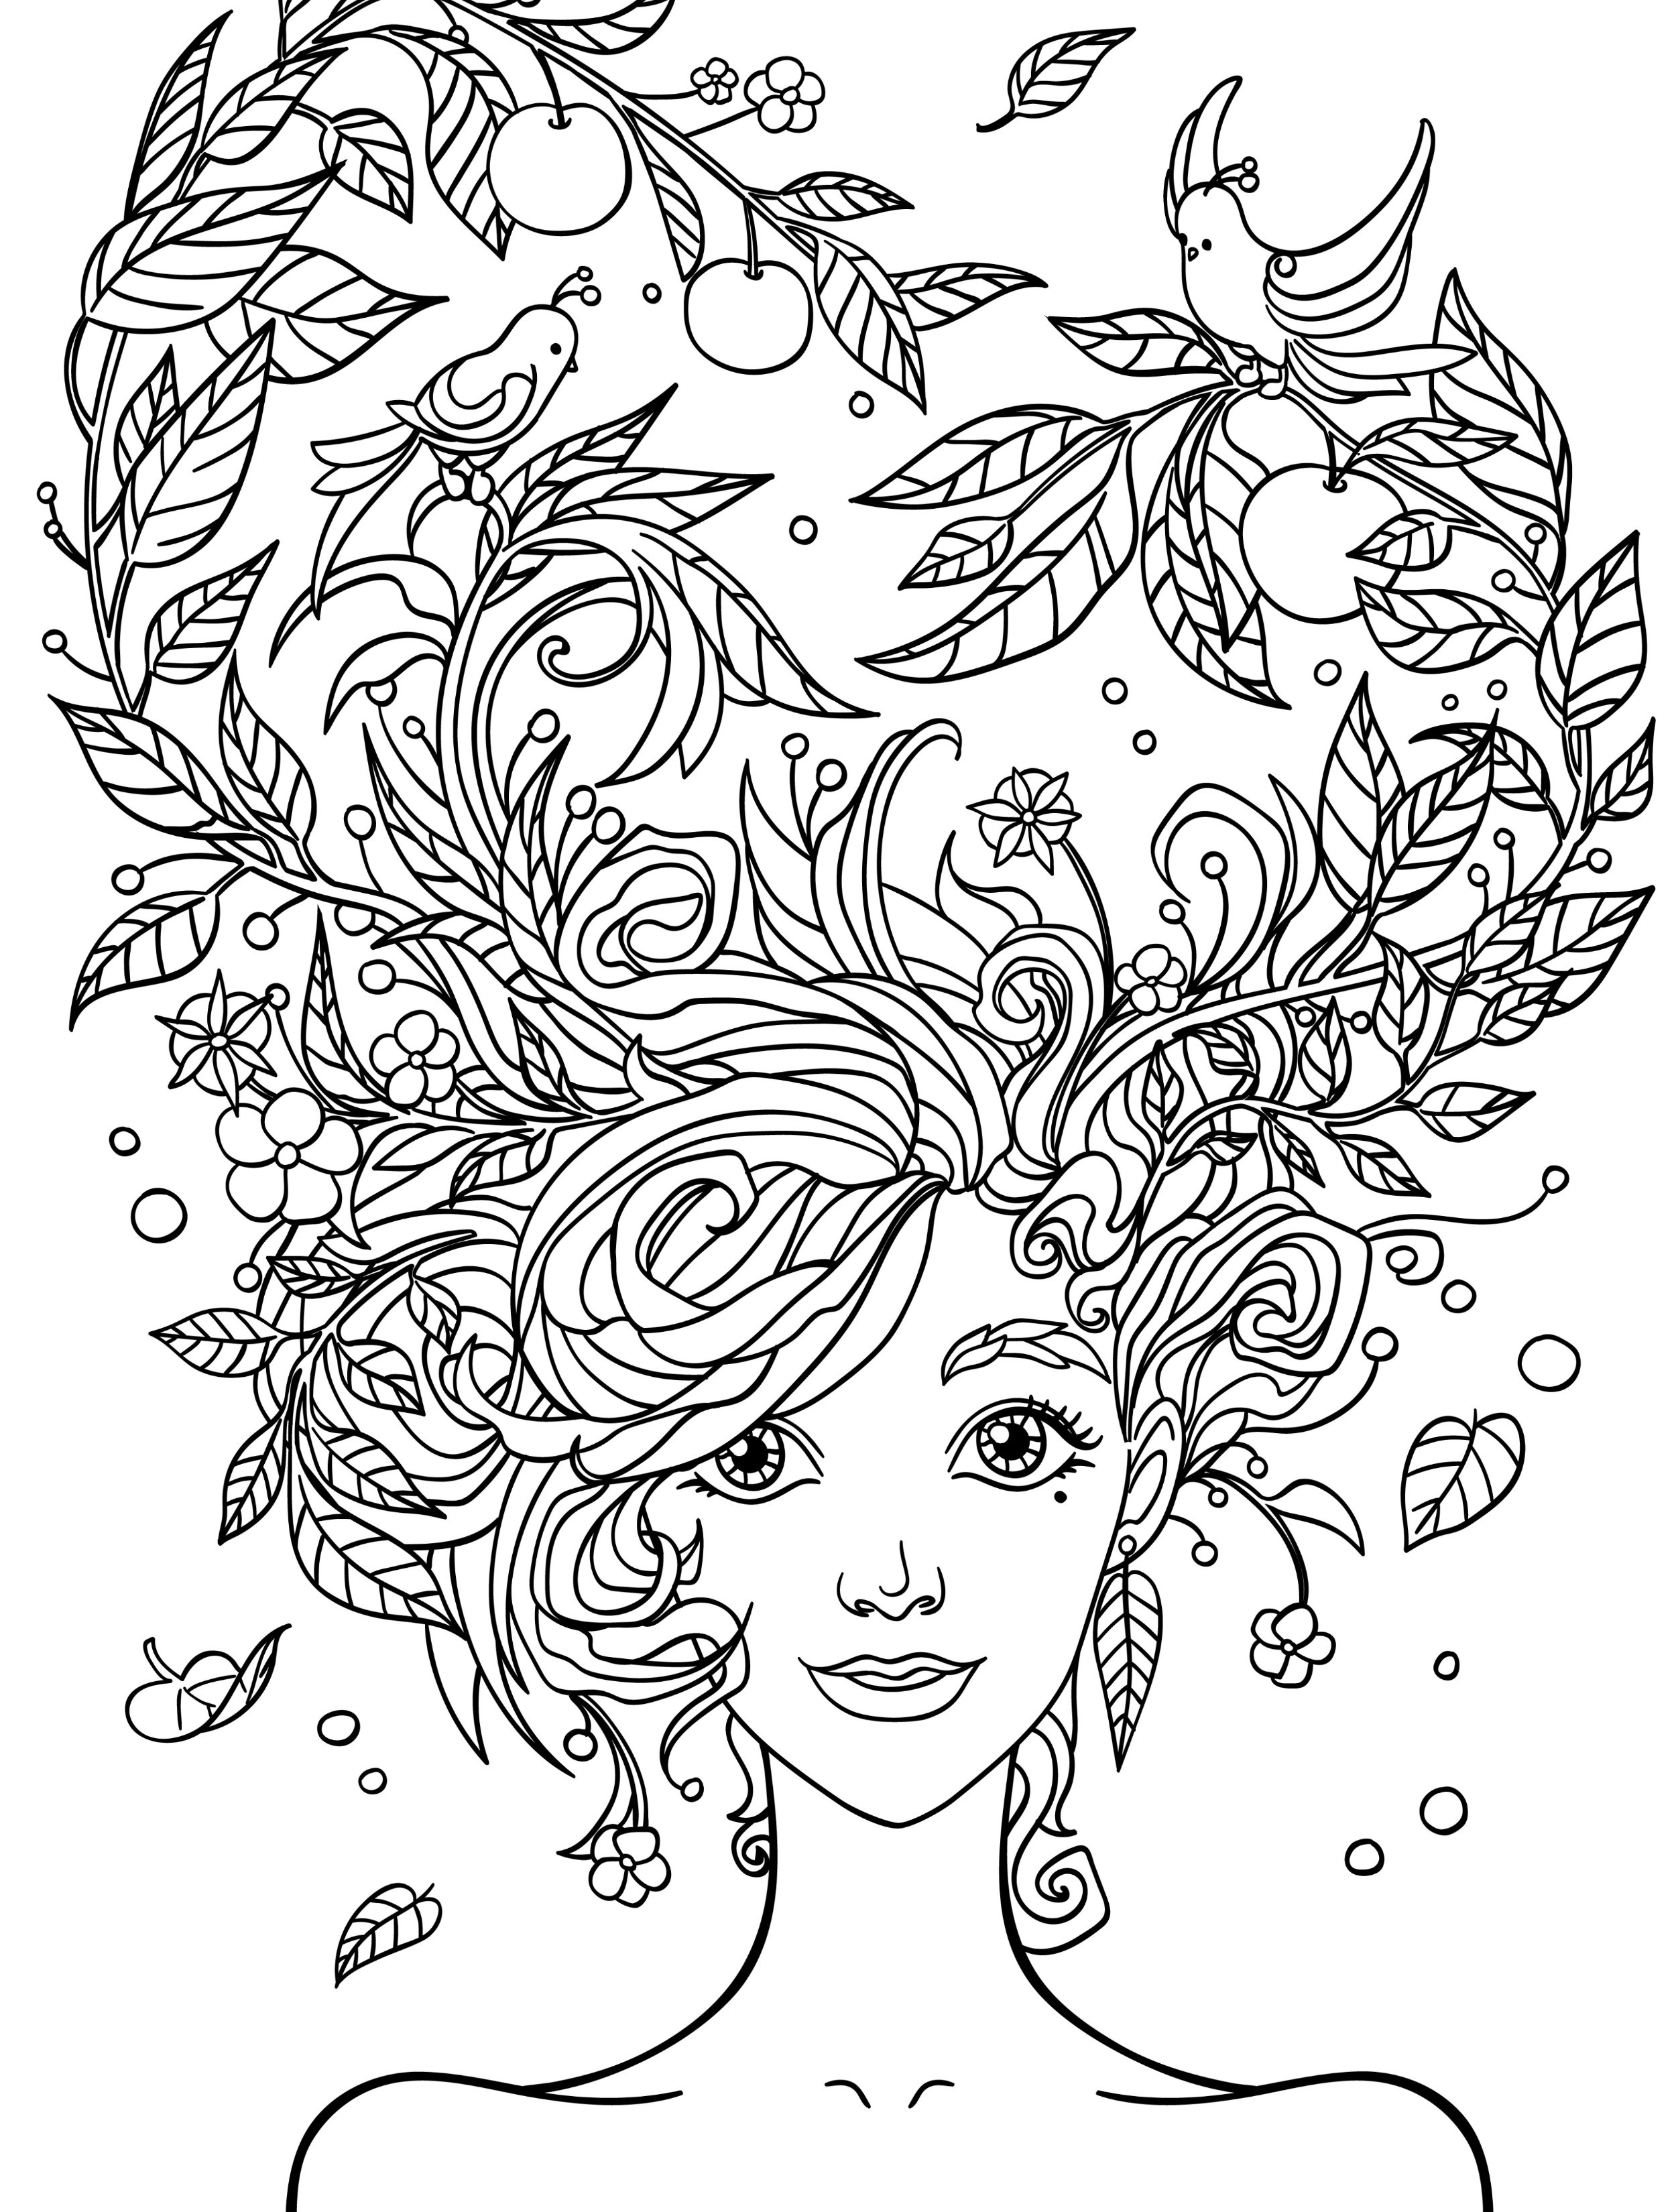 Coloring Pages Of People
 10 Crazy Hair Adult Coloring Pages Page 5 of 12 Nerdy